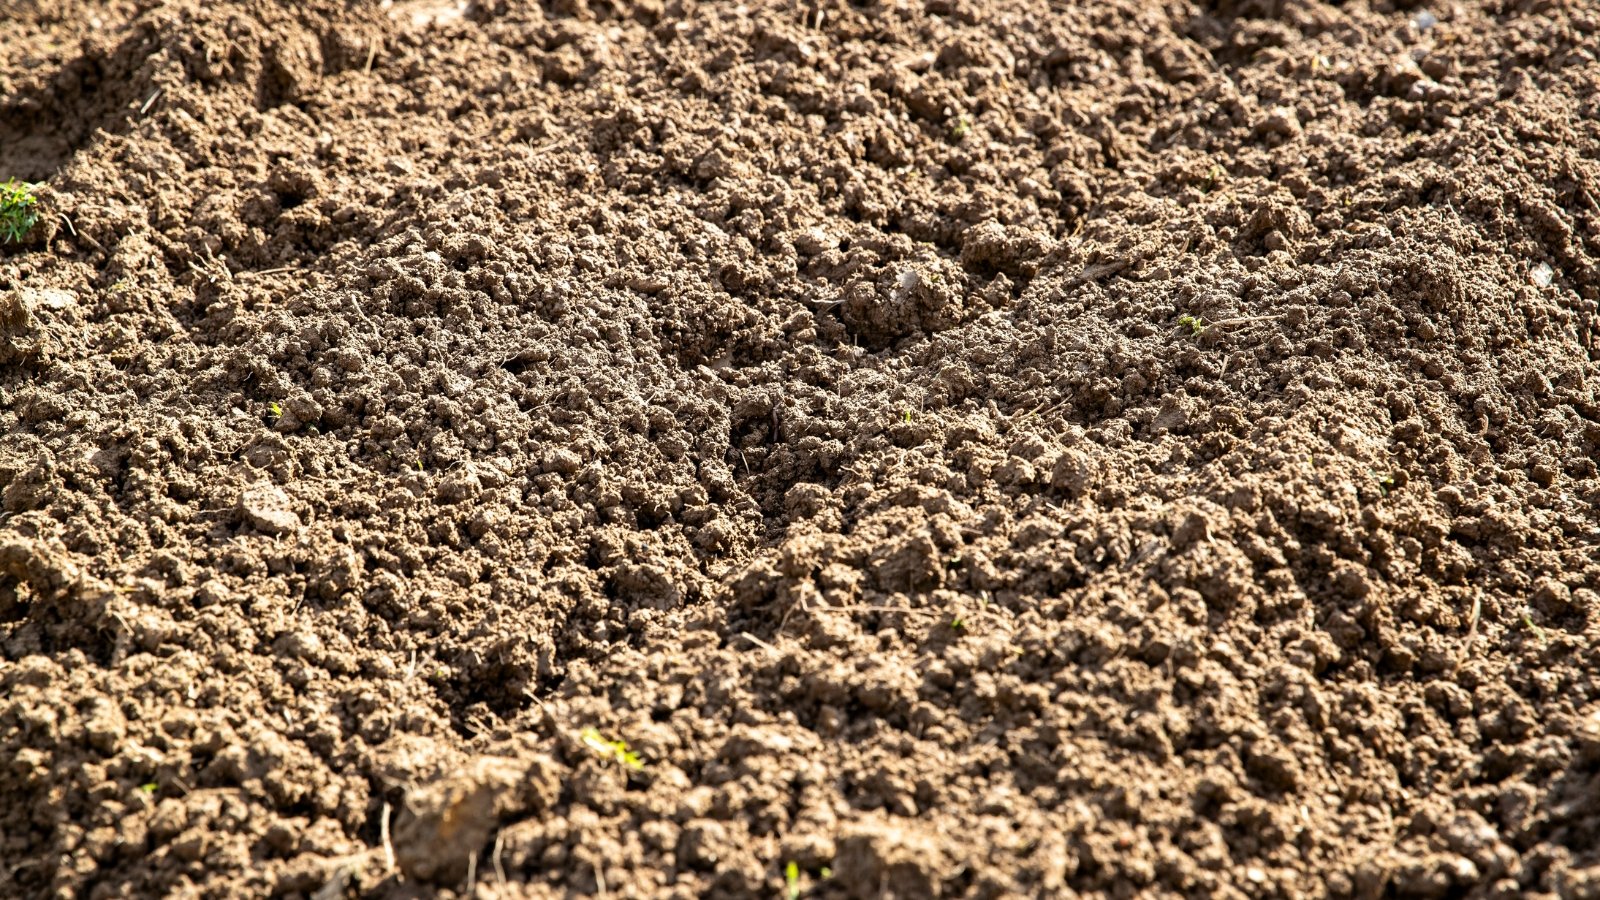 The healthy soil appears dark and crumbly, with a rich texture.